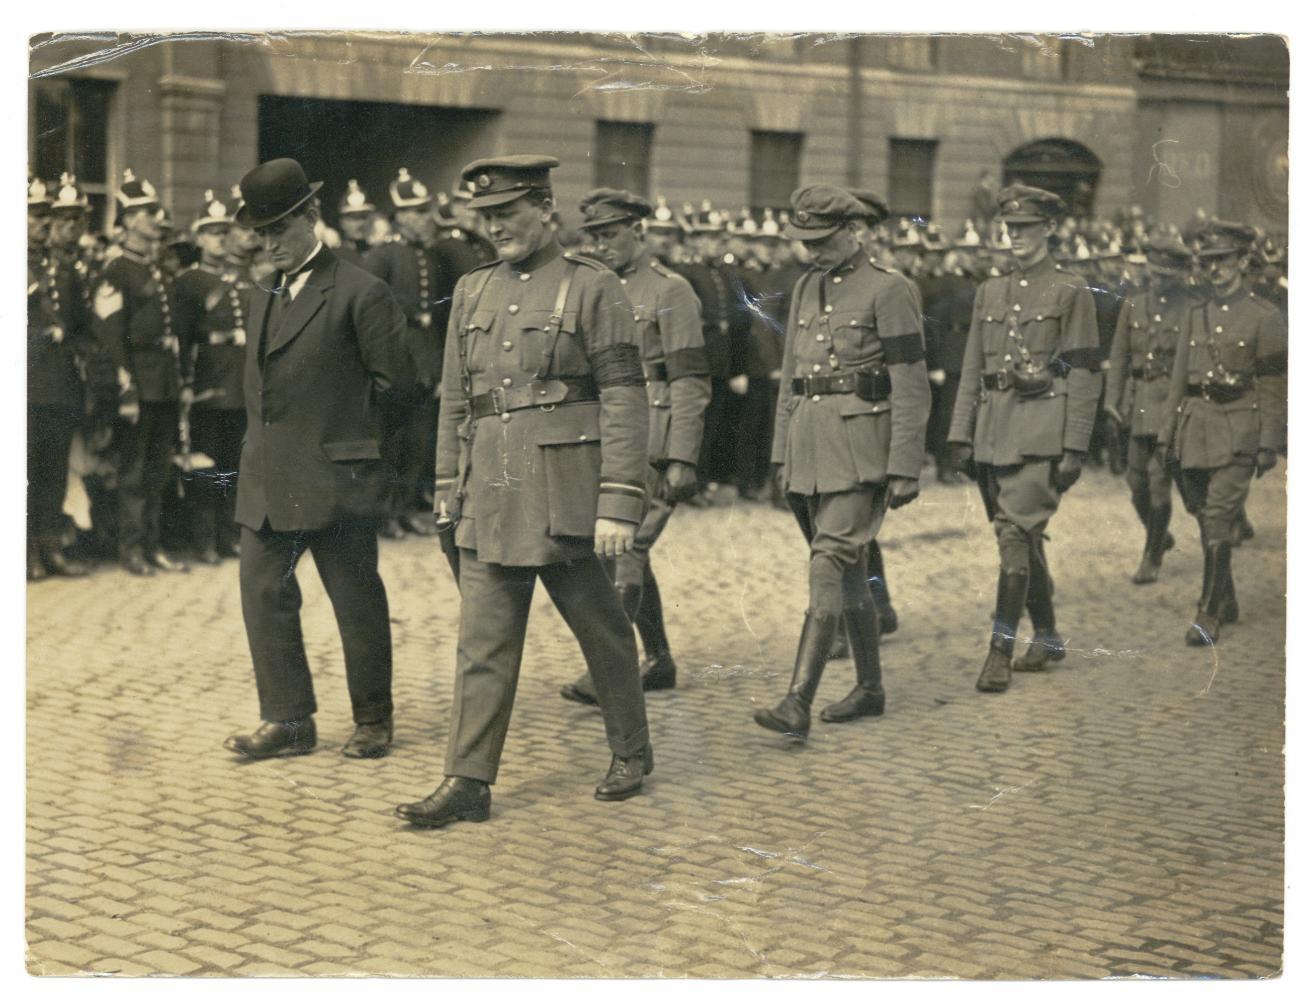 Part of the Funeral procession accompanying the remains of General Michael Collins, 28 August 1922 [IE-MA-AL-IMG-259, Brother Allen collection, Military Archives]